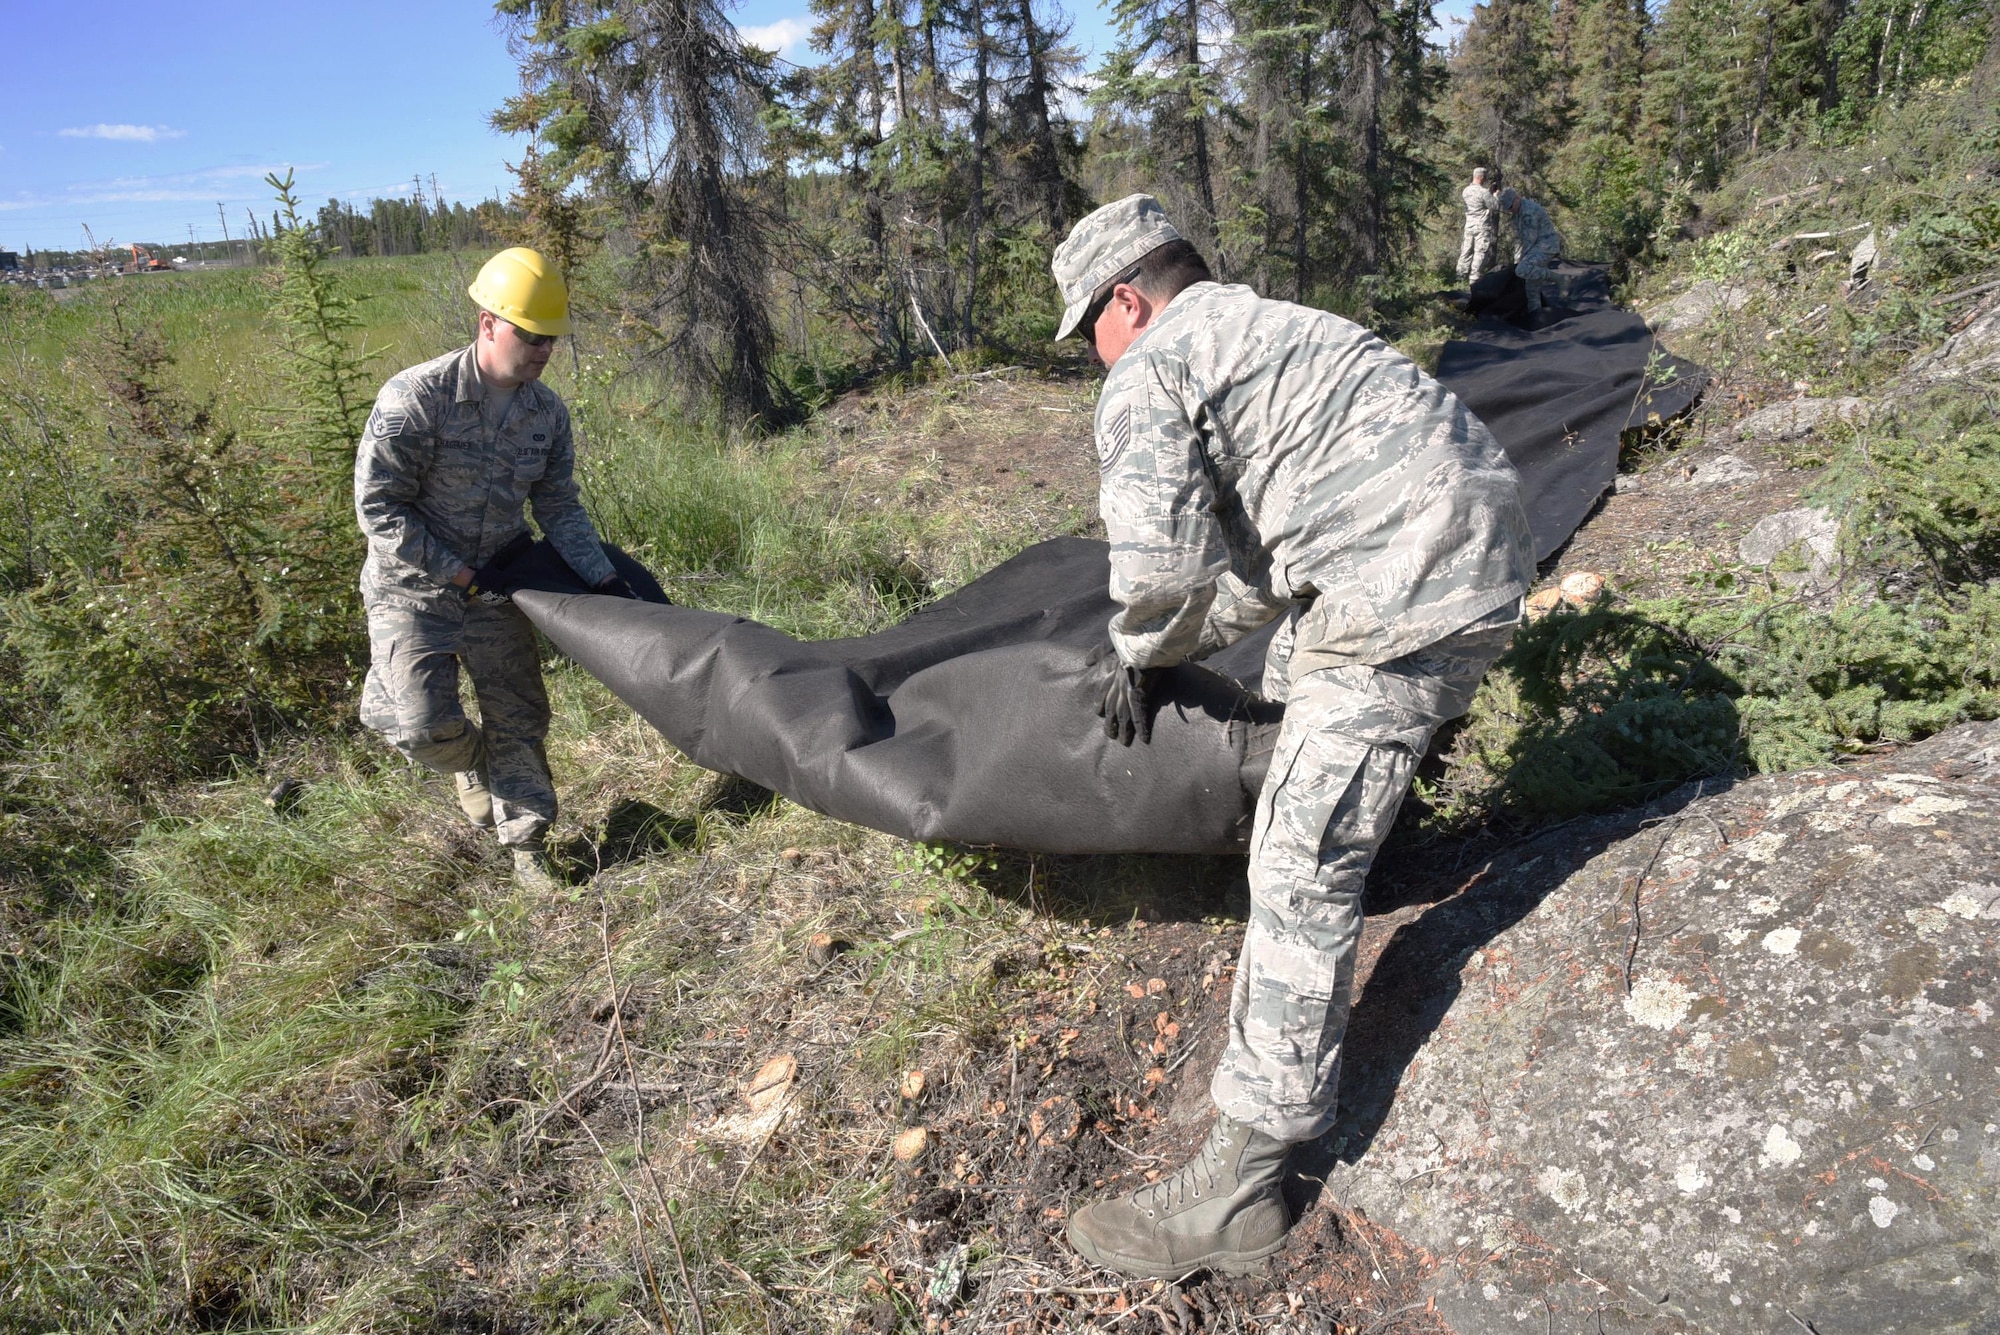 Oregon Air National Guard Staff Sgt. Daniel Hagemier, assigned to the 142nd Fighter Wing Civil Engineers Squadron (left), and Tech. Sgt. Charles Jedda (right), move a large role of stabling material to provide a base for rock and other materials, extending a public trail at Niven Lake at Yellowknife, Northwest Territories, Canada, July 18, 2017. The Civil Engineer Airmen are spending two-weeks in Canada working with Canadian Armed Forces members from Cold Lake, Alberta, Canada, on a variety of projects during their Deployment for Training (DFT). (U.S. Air National Guard photo/Master Sgt. John Hughel, 142nd Fighter Wing Public Affairs)